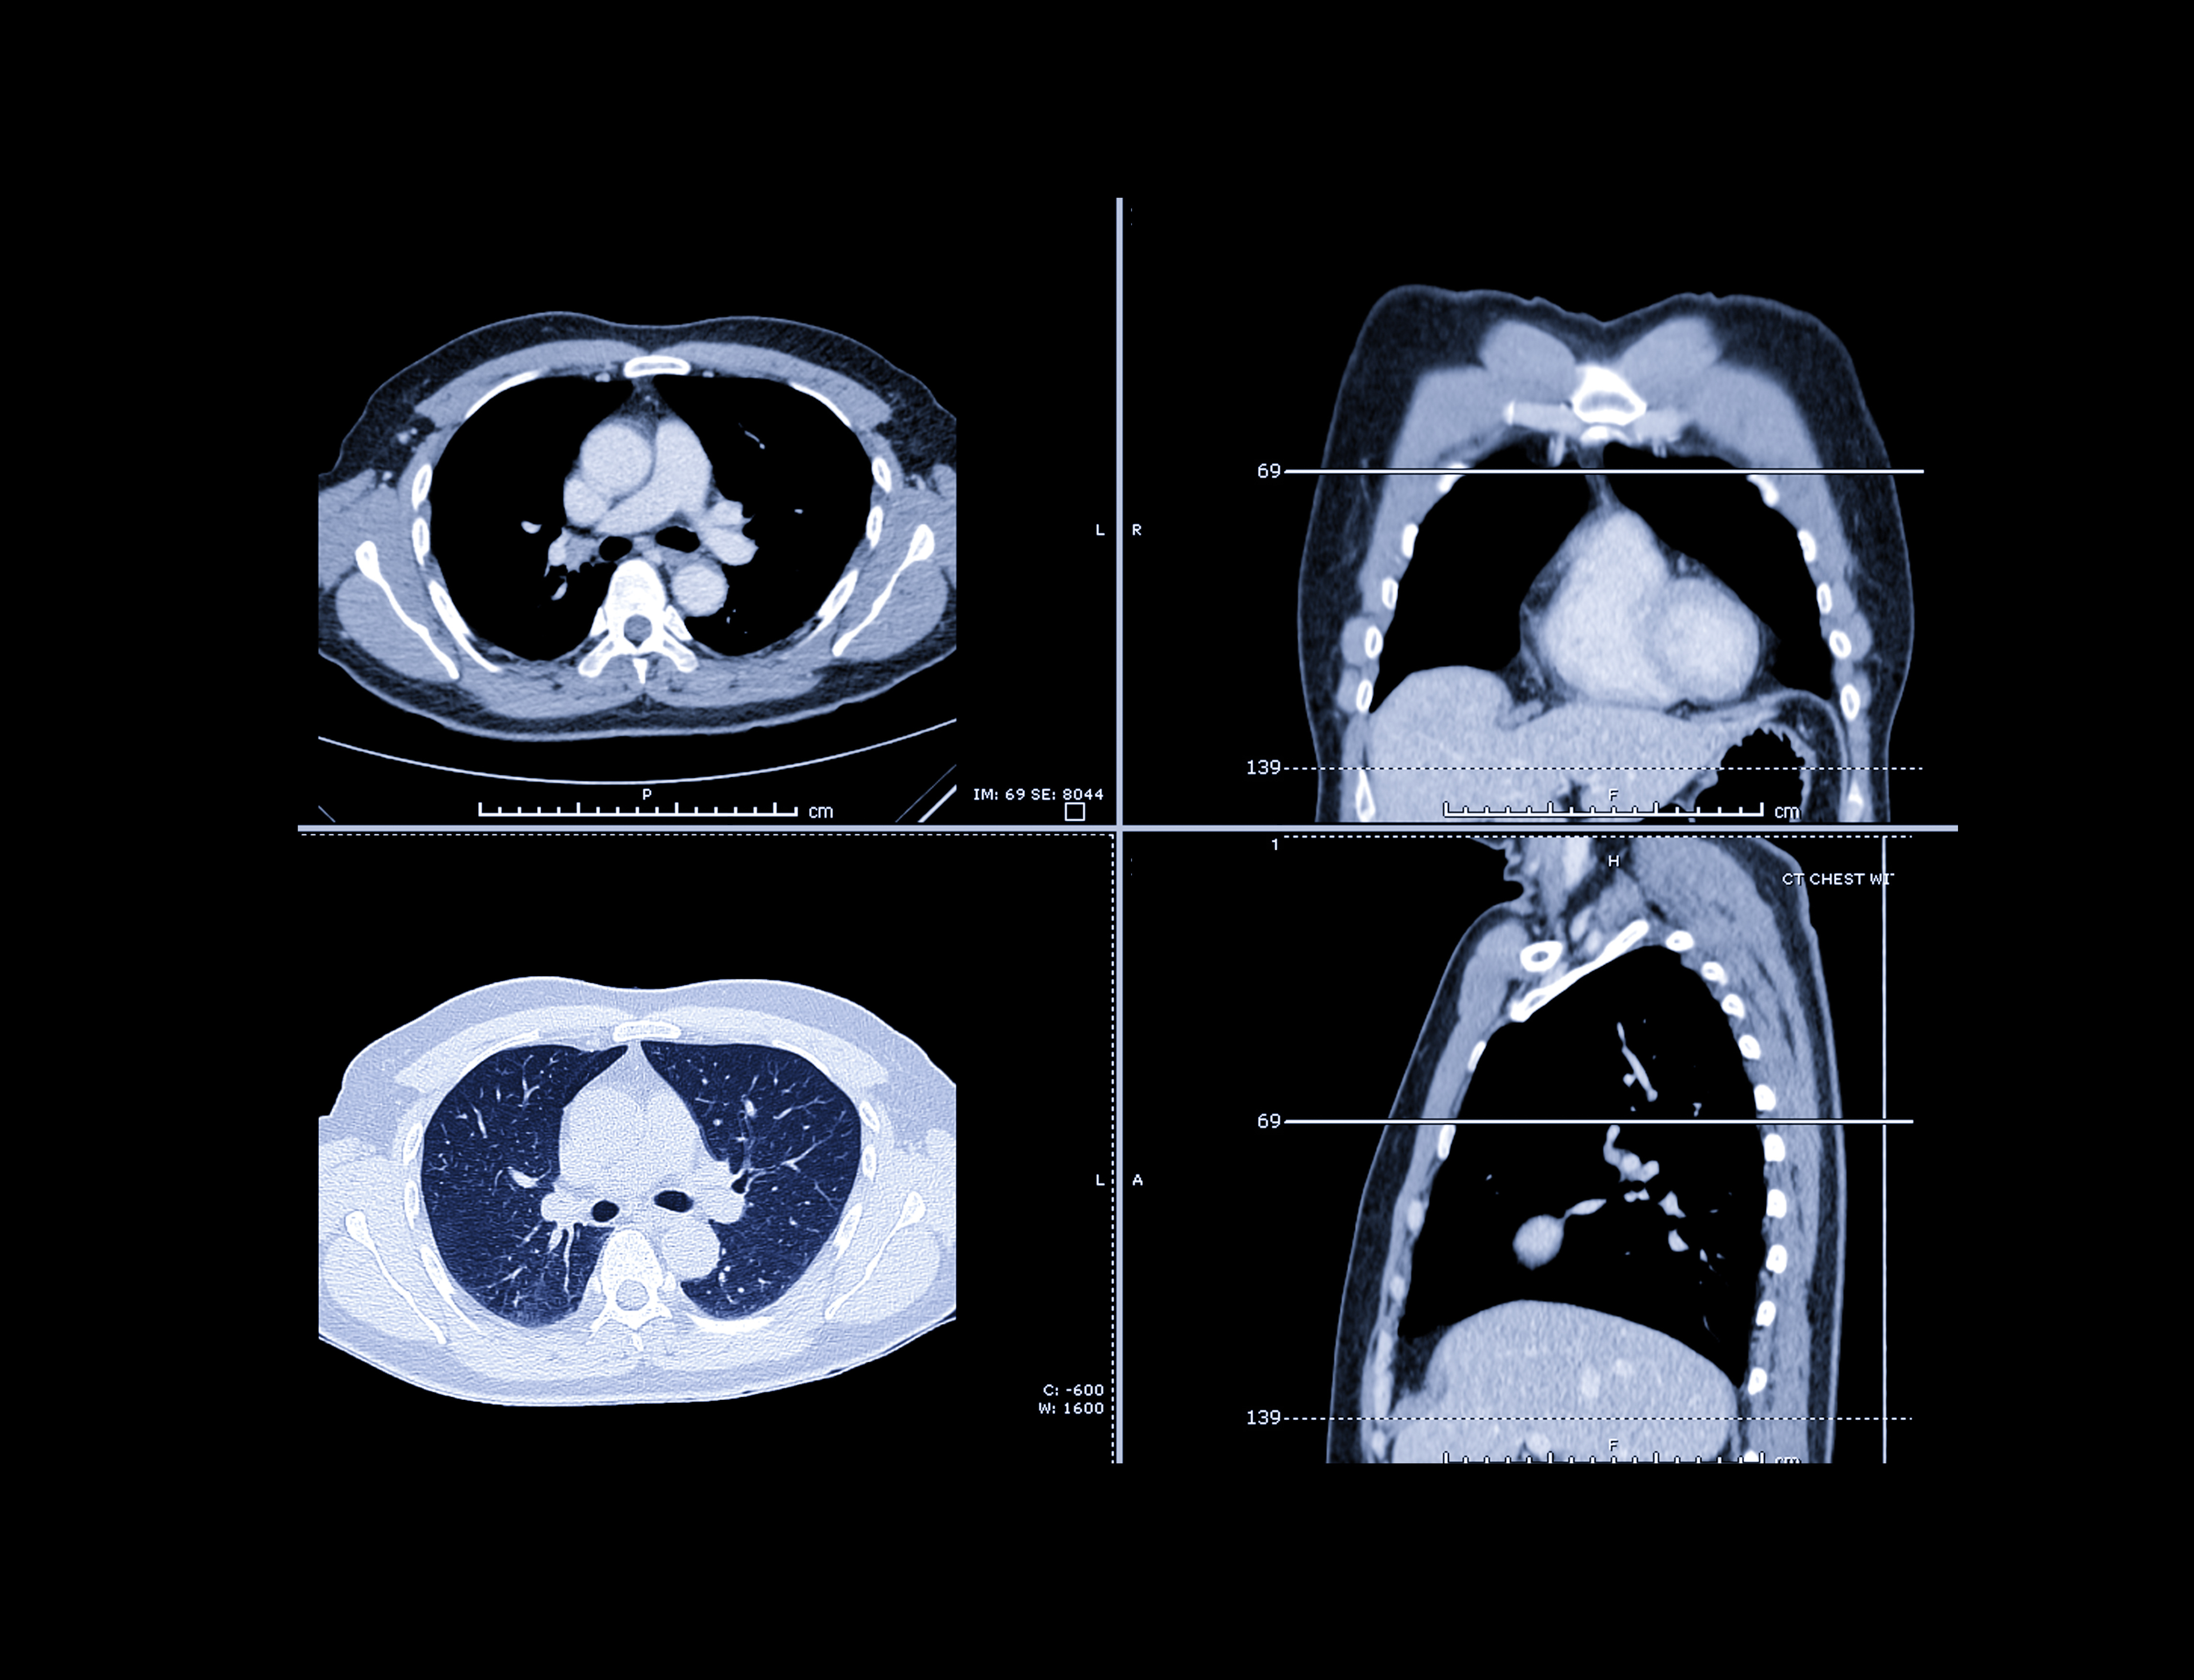 New Study Suggests Lung-Related Comorbidities Have No Impact on Lung Cancer Detection